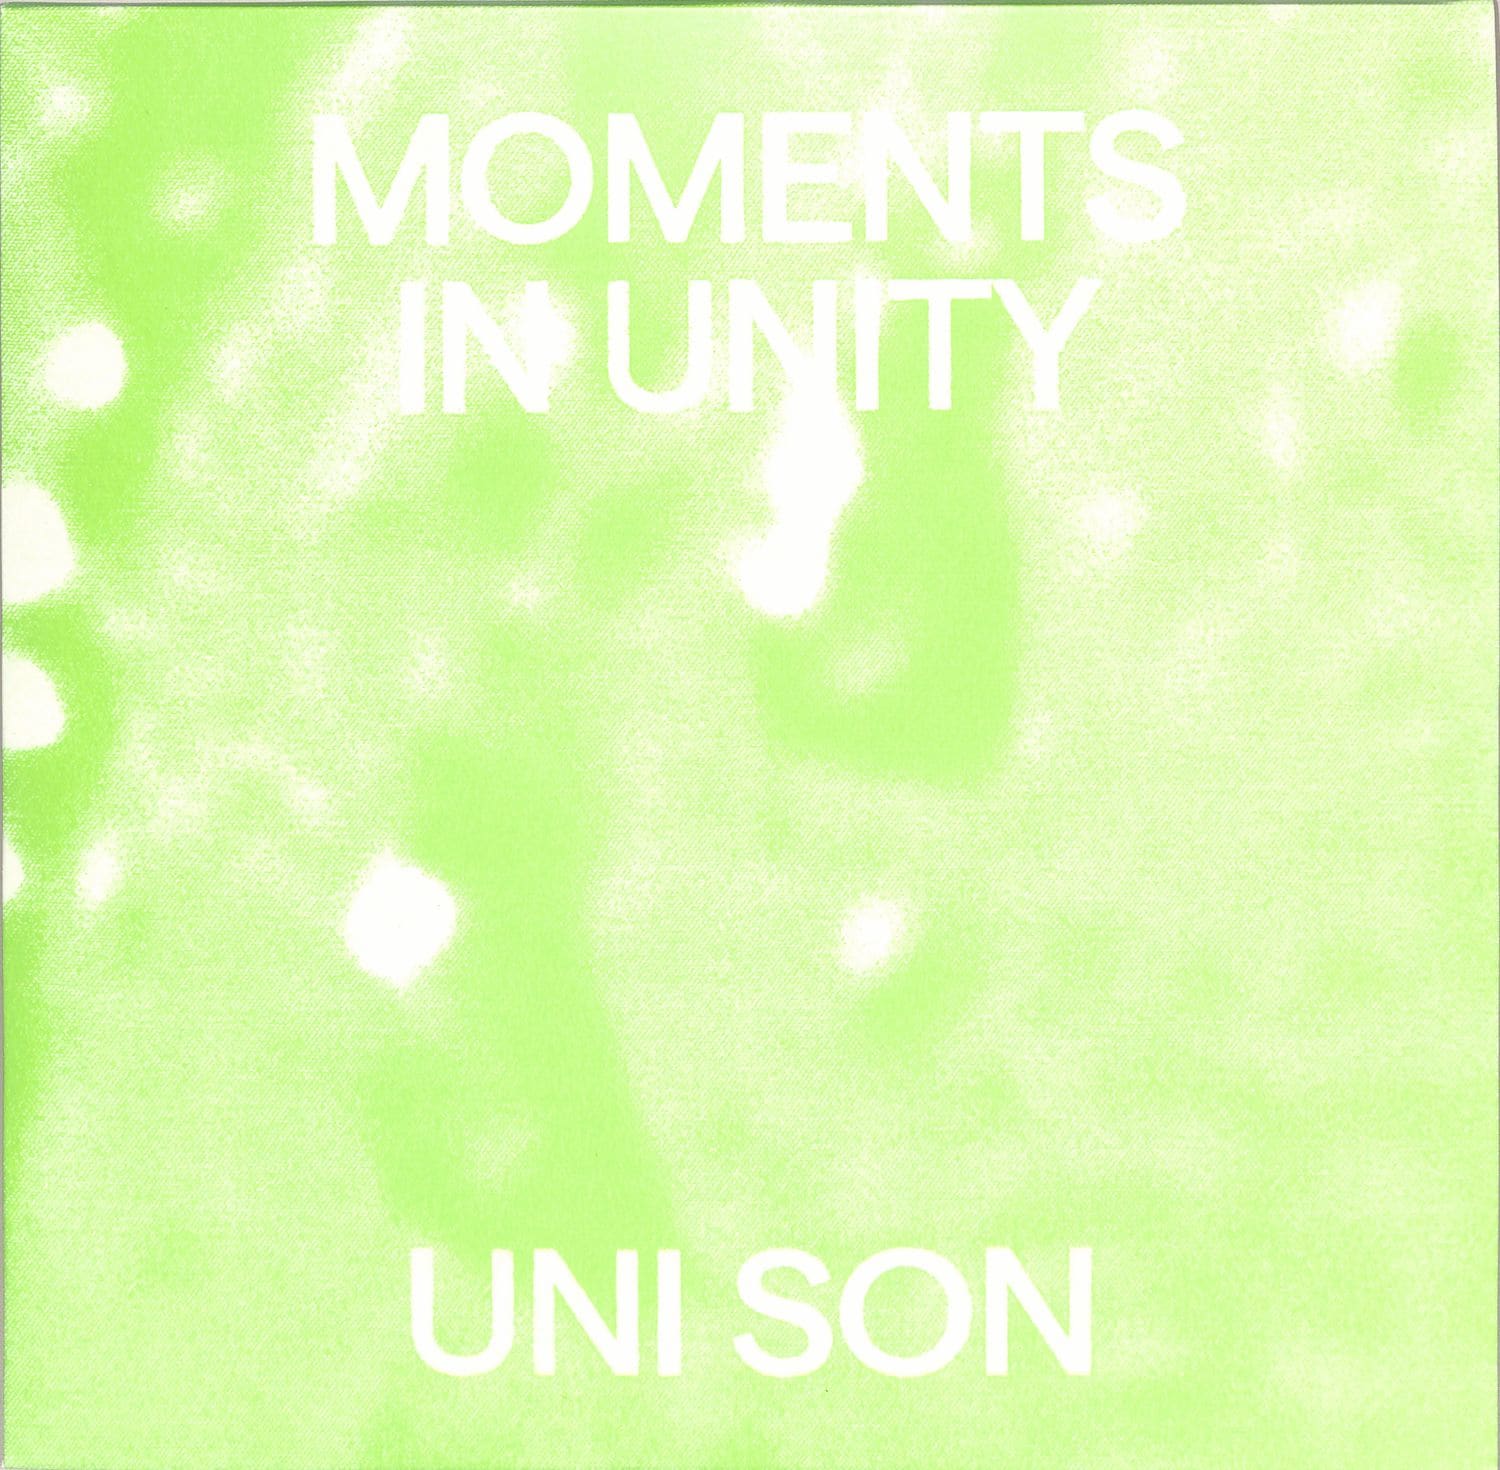 Uni Son - MOMENTS IN UNITY 